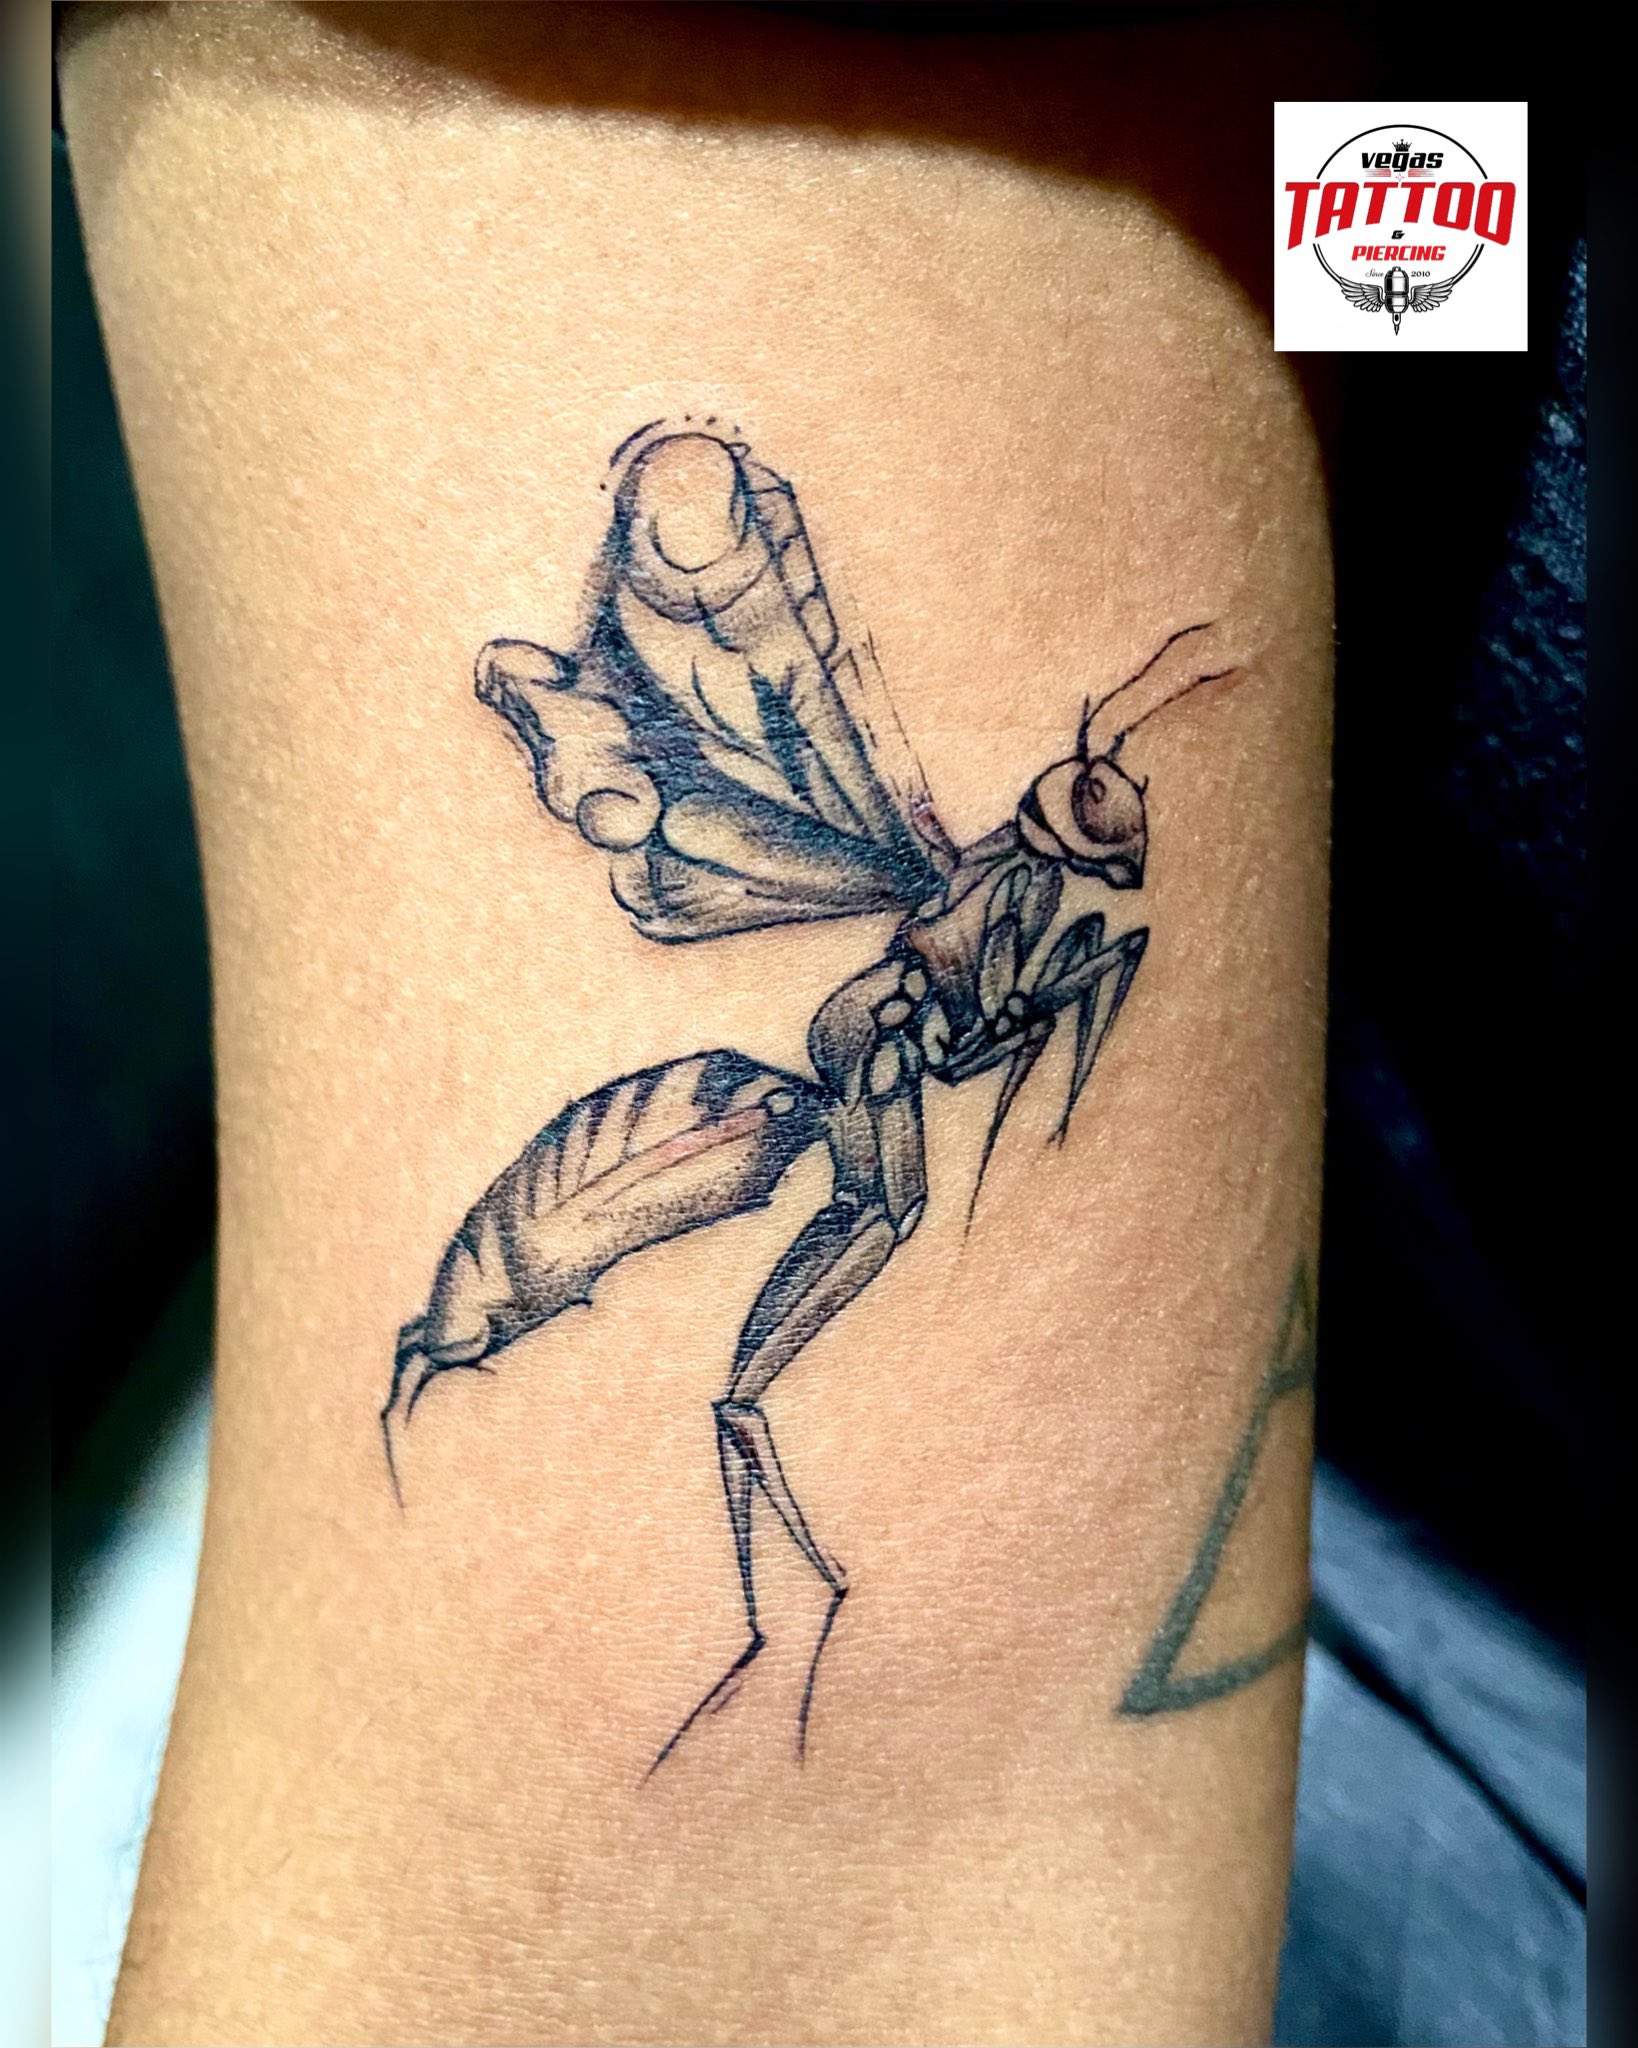 Tattoo of a wasp done with only one continuous line, Jane Cho : r/pics